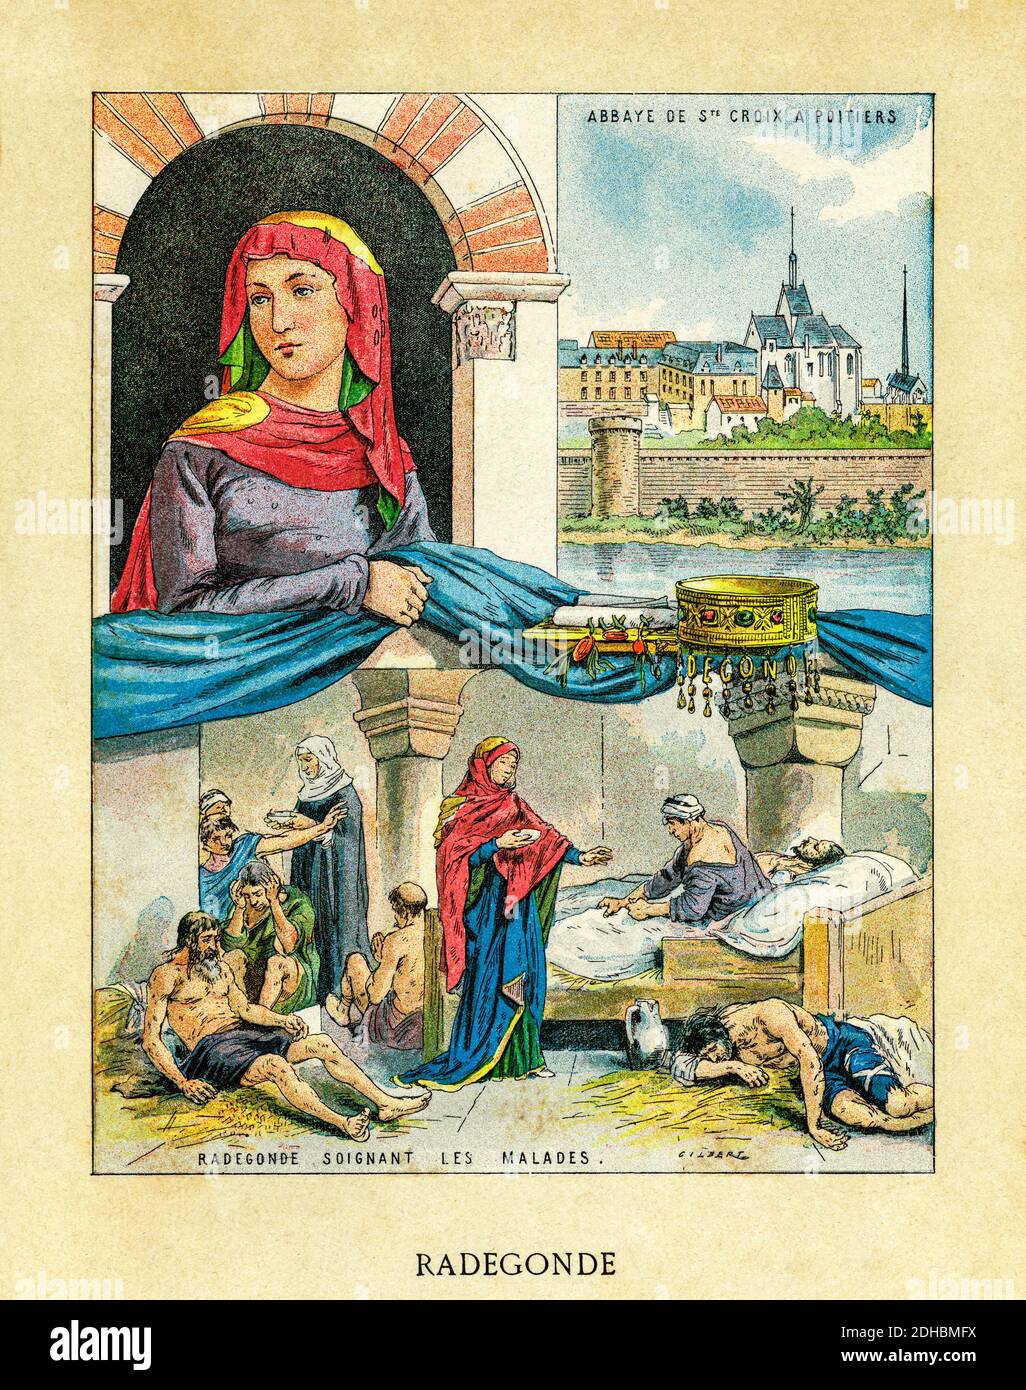 Old color lithography portrait of Radegund (520-587) Thuringian princess and Frankish queen, who founded the Abbey of the Holy Cross at Poitiers. Patron saint of several churches in France and England and of Jesus College in Cambridge. France. Les Français Illustres by Gustave Demoulin 1897 Stock Photo